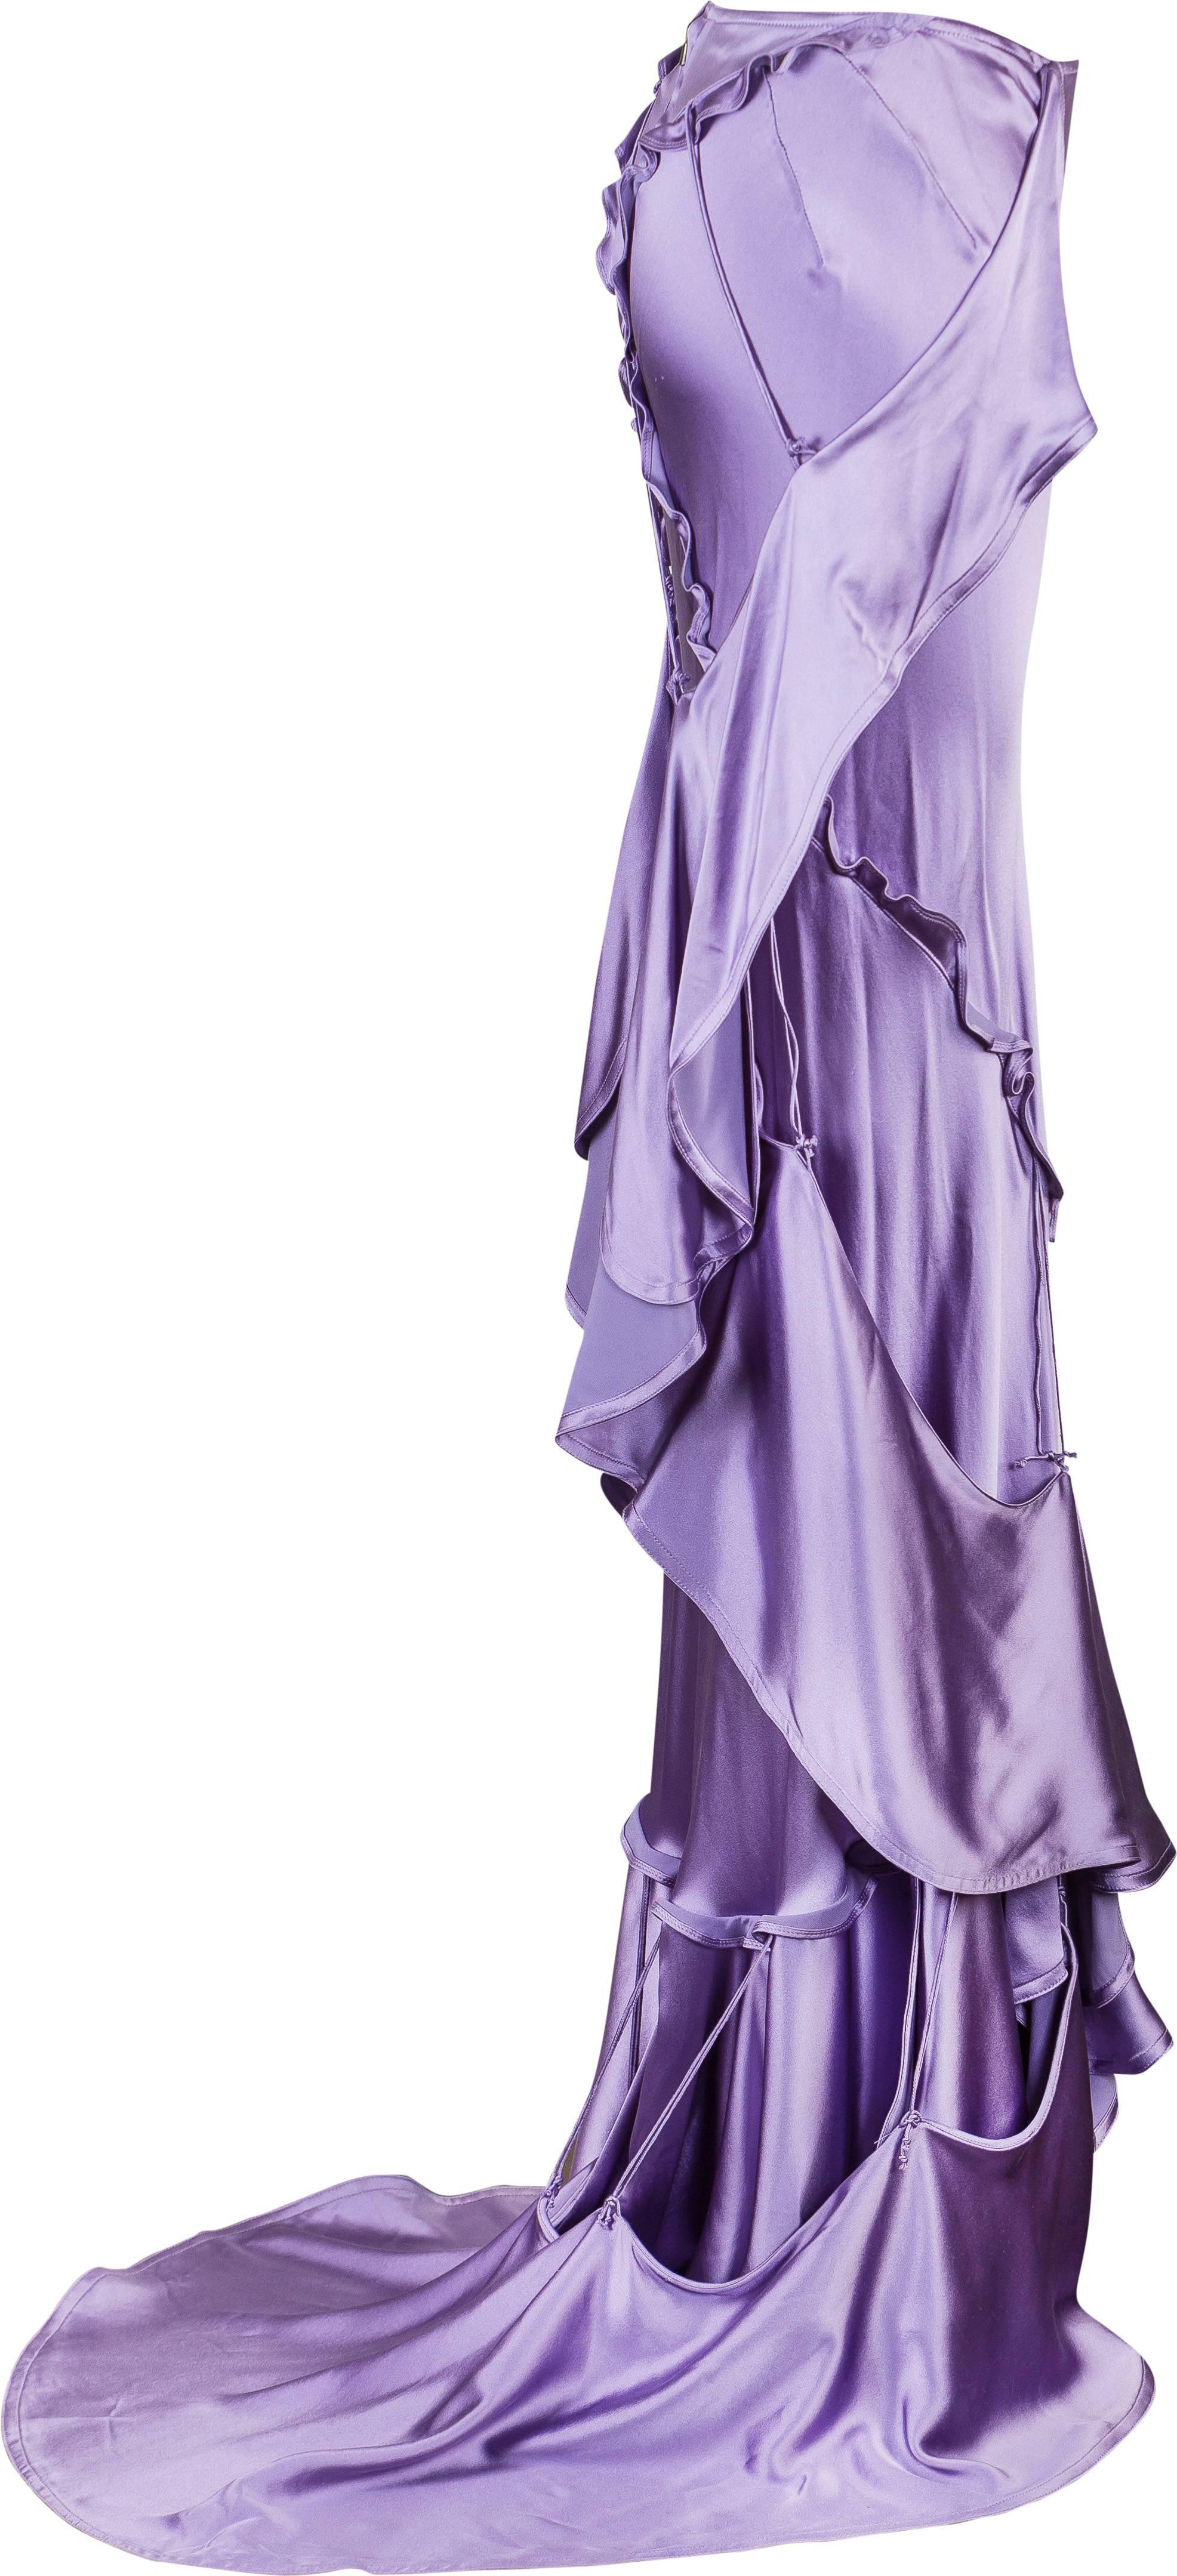 Yves Saint Laurent Fall 2003 Lilac Silk Evening Skirt
Designed by Tom Ford
Interesting detail throughout skirt, ruffles, drapes and train
Secured with a YSL metal zip at the back
FR38